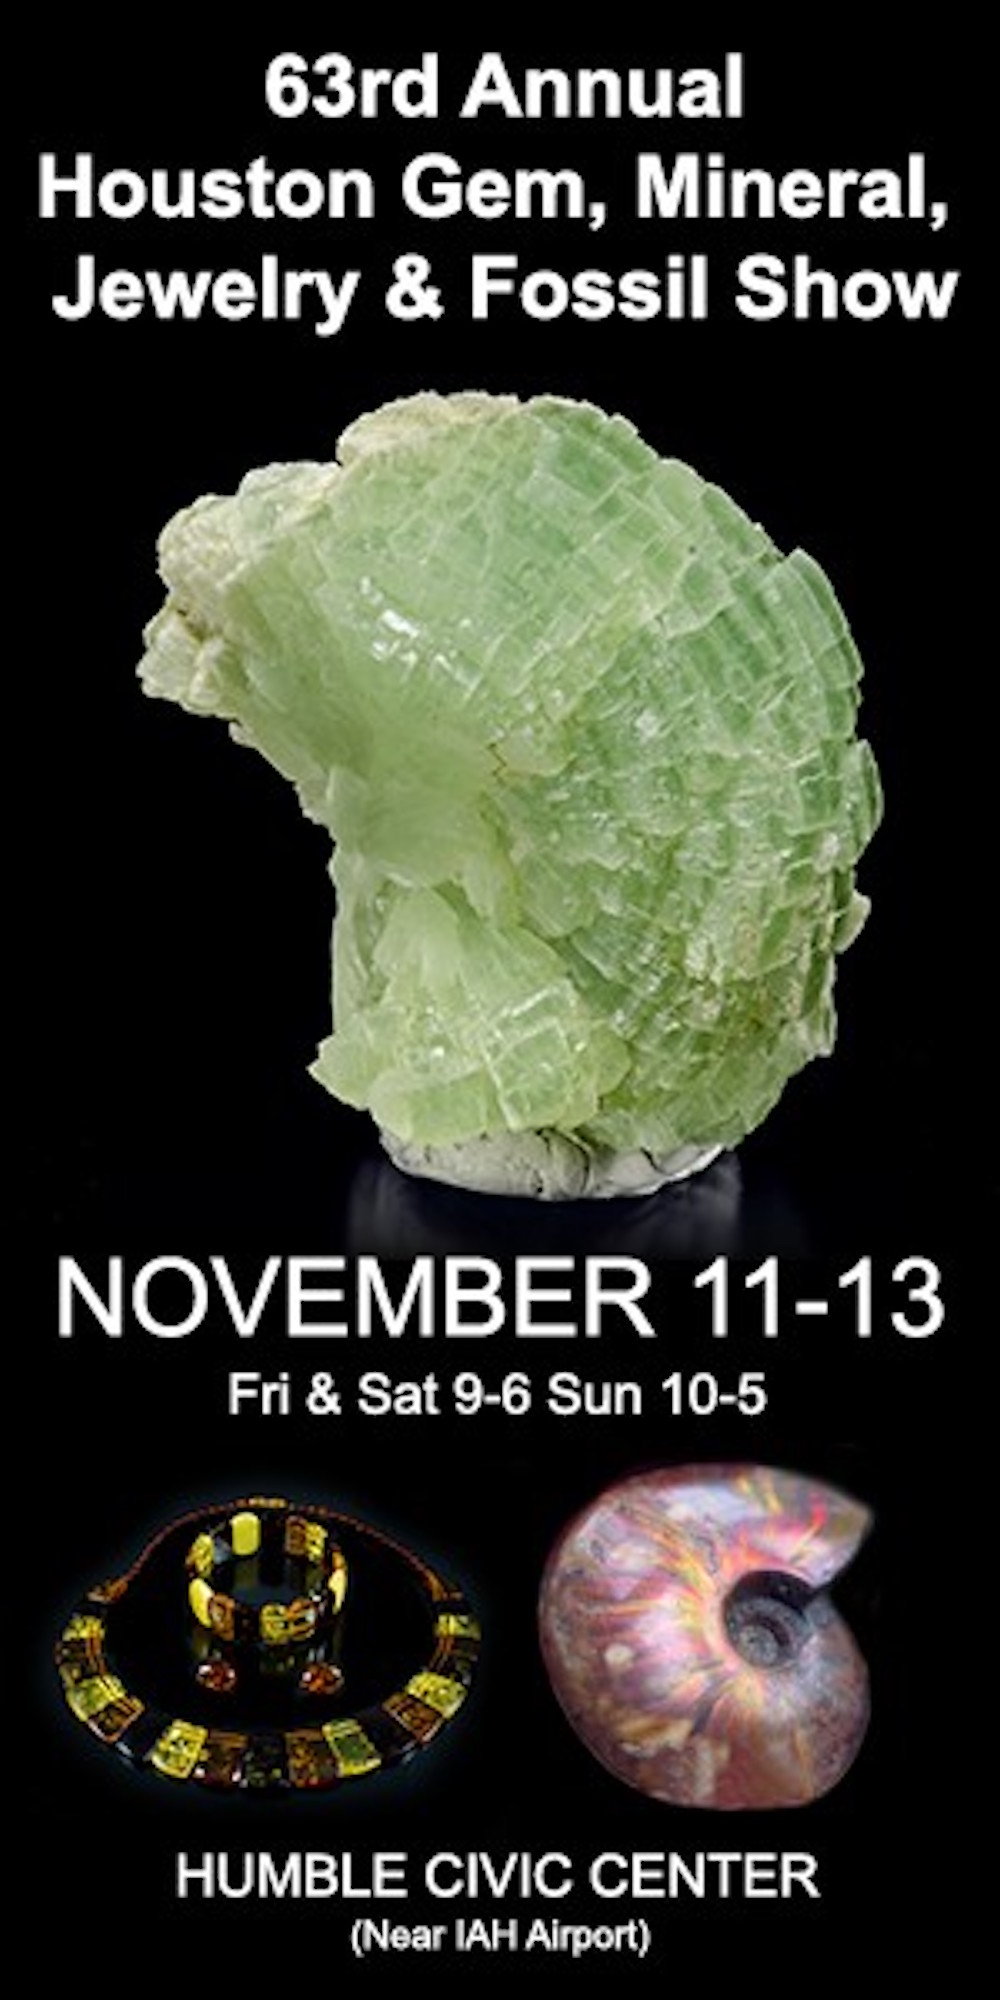 63rd Annual HGMS Gem, Jewelry, Mineral, and Fossil Show